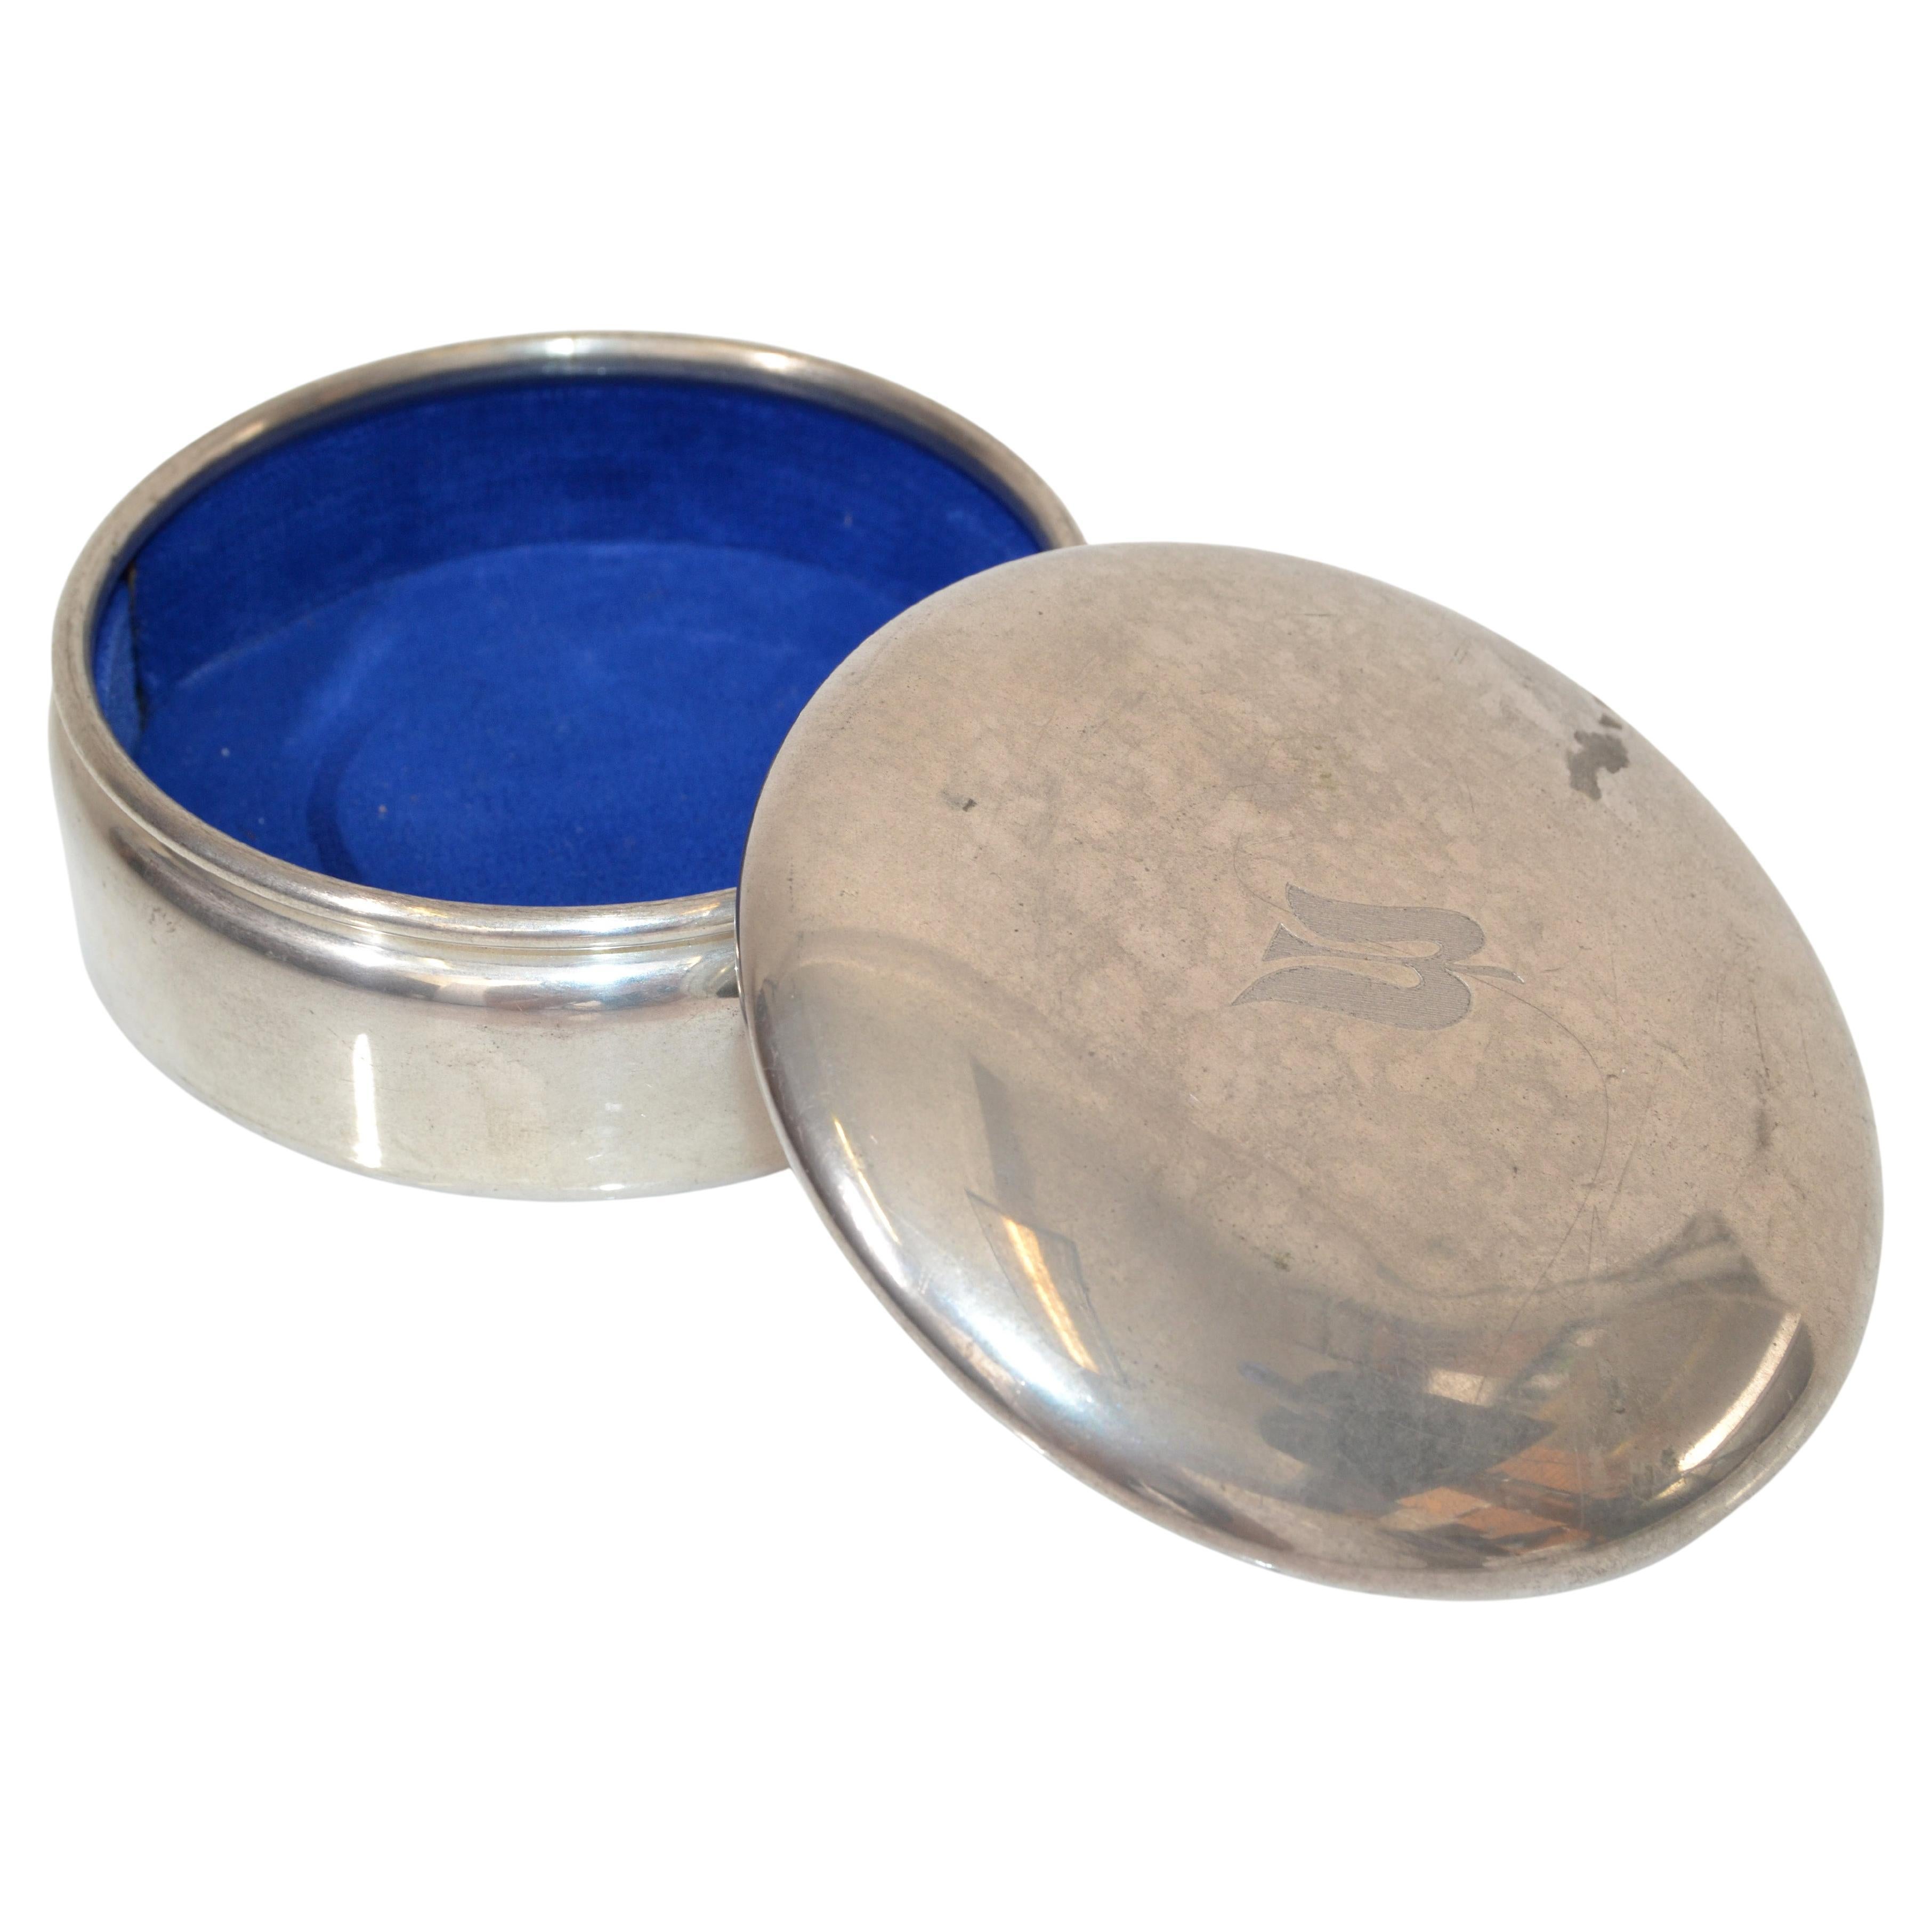 Empire Pewter 701 Covered Trinket Ring Dish Decorative Box Blue Velvet Inlaid 89 For Sale